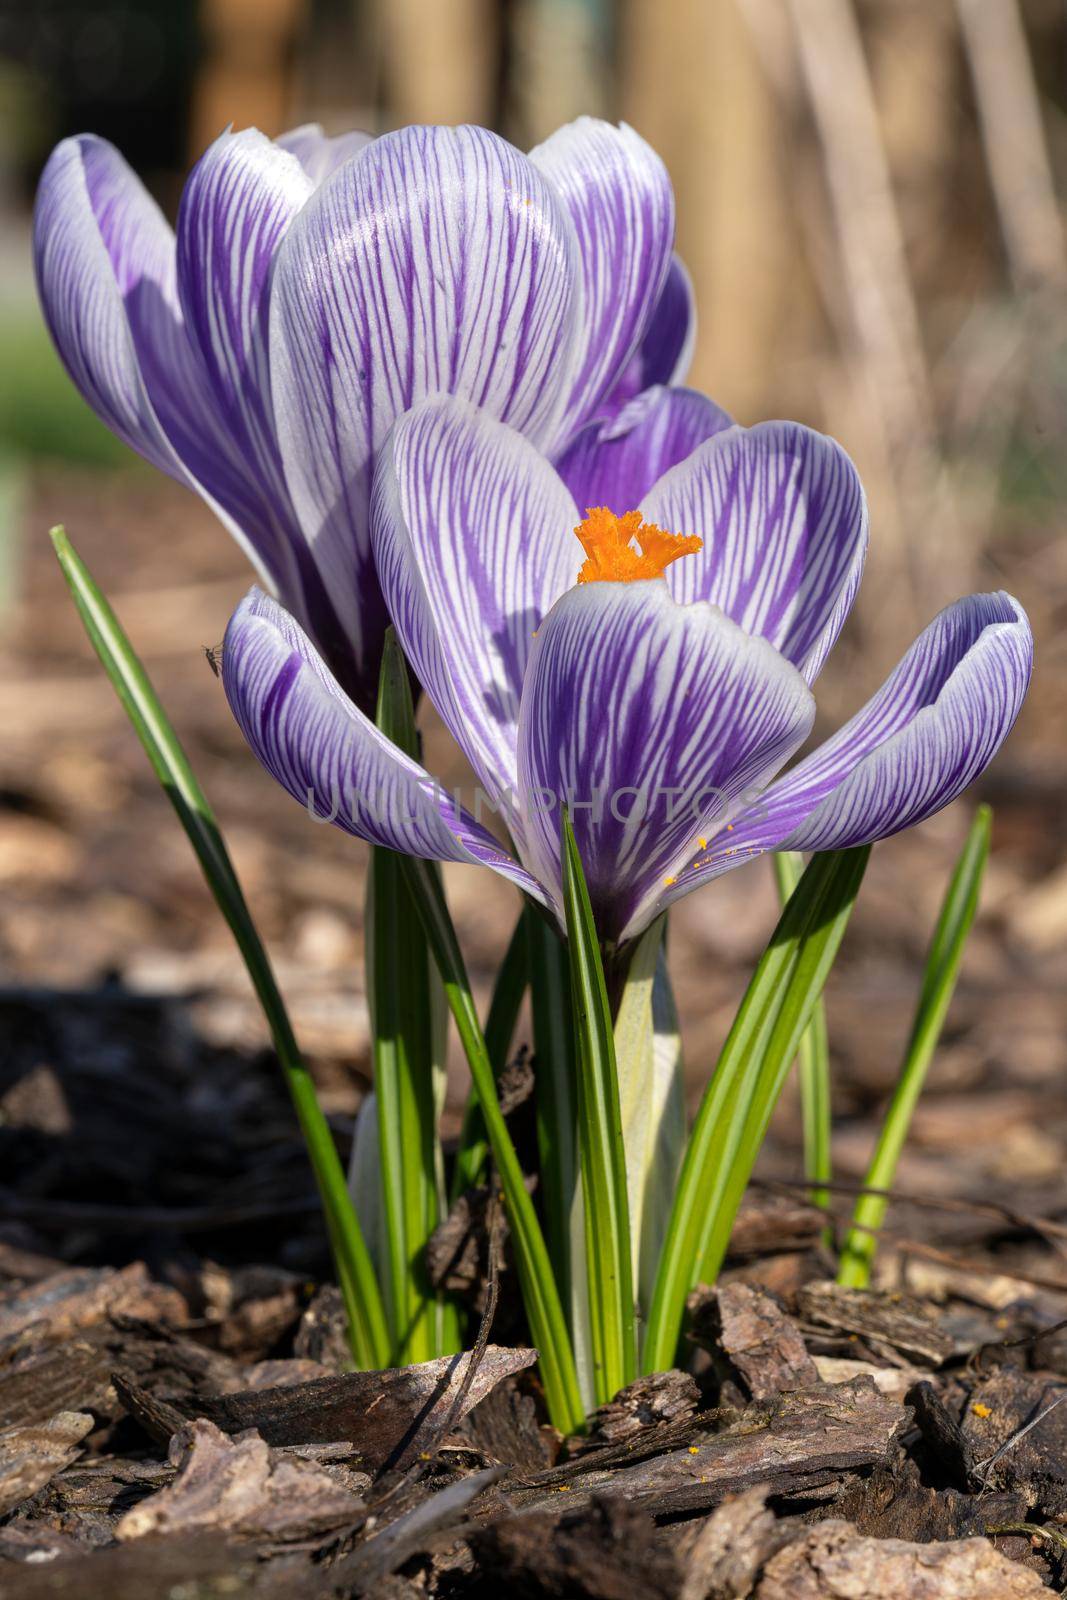 Crocus, close up image of the flowers of
 spring